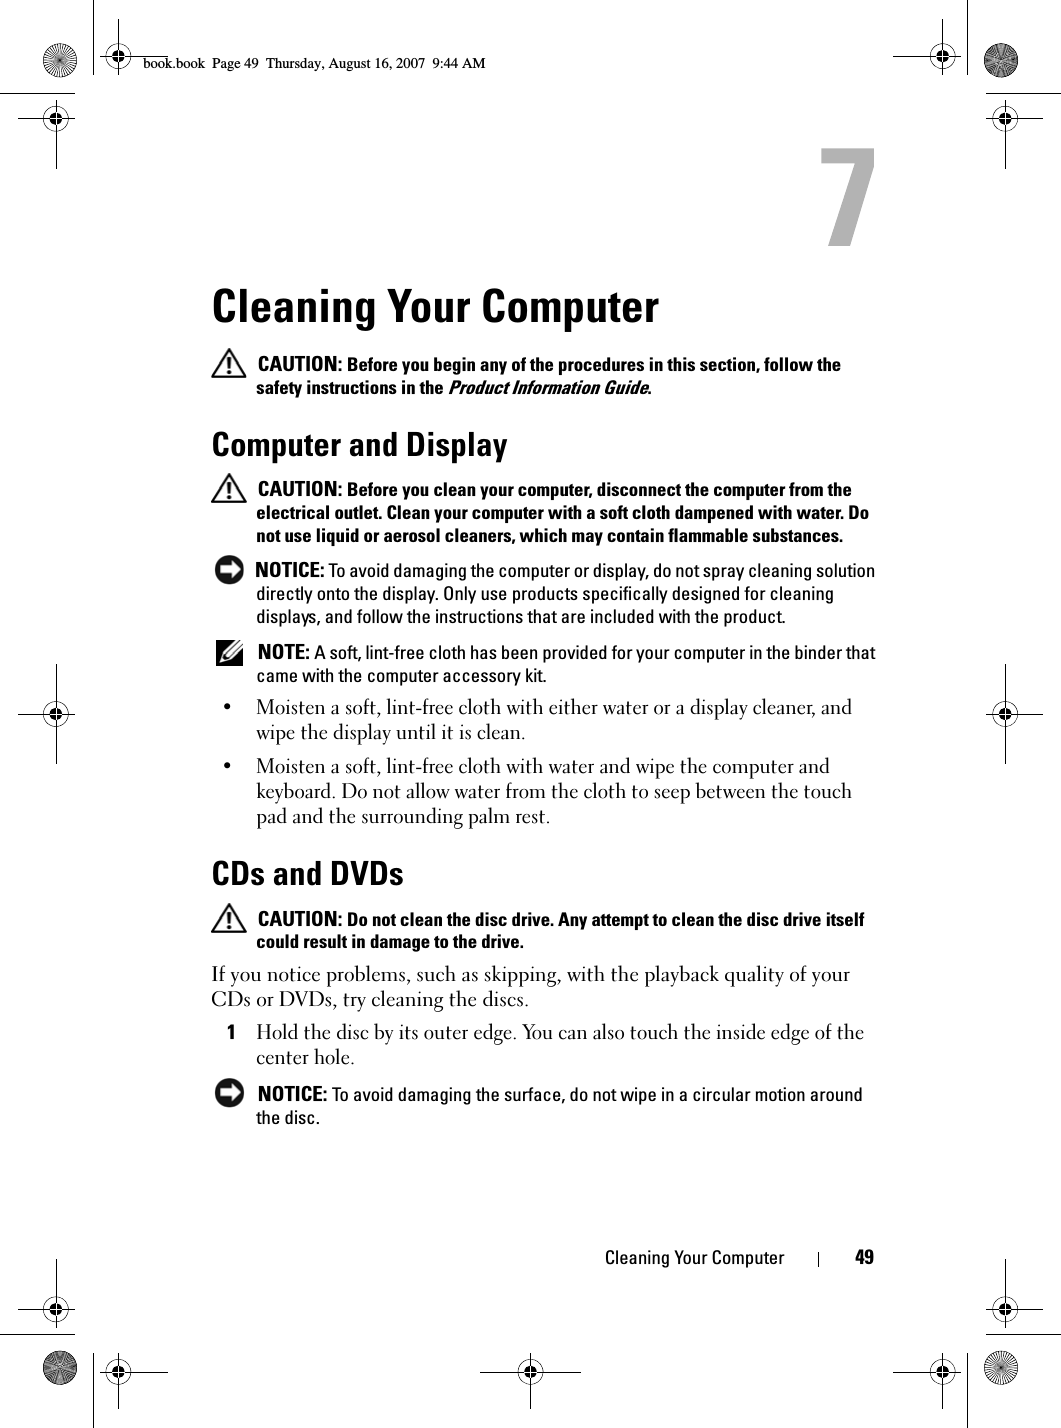 Cleaning Your Computer 49Cleaning Your Computer CAUTION: Before you begin any of the procedures in this section, follow the safety instructions in the Product Information Guide.Computer and Display CAUTION: Before you clean your computer, disconnect the computer from the electrical outlet. Clean your computer with a soft cloth dampened with water. Do not use liquid or aerosol cleaners, which may contain flammable substances. NOTICE: To avoid damaging the computer or display, do not spray cleaning solution directly onto the display. Only use products specifically designed for cleaning displays, and follow the instructions that are included with the product. NOTE: A soft, lint-free cloth has been provided for your computer in the binder that came with the computer accessory kit.• Moisten a soft, lint-free cloth with either water or a display cleaner, and wipe the display until it is clean.• Moisten a soft, lint-free cloth with water and wipe the computer and keyboard. Do not allow water from the cloth to seep between the touch pad and the surrounding palm rest.CDs and DVDs CAUTION: Do not clean the disc drive. Any attempt to clean the disc drive itself could result in damage to the drive.If you notice problems, such as skipping, with the playback quality of your CDs or DVDs, try cleaning the discs.1Hold the disc by its outer edge. You can also touch the inside edge of the center hole. NOTICE: To avoid damaging the surface, do not wipe in a circular motion around the disc.book.book  Page 49  Thursday, August 16, 2007  9:44 AM